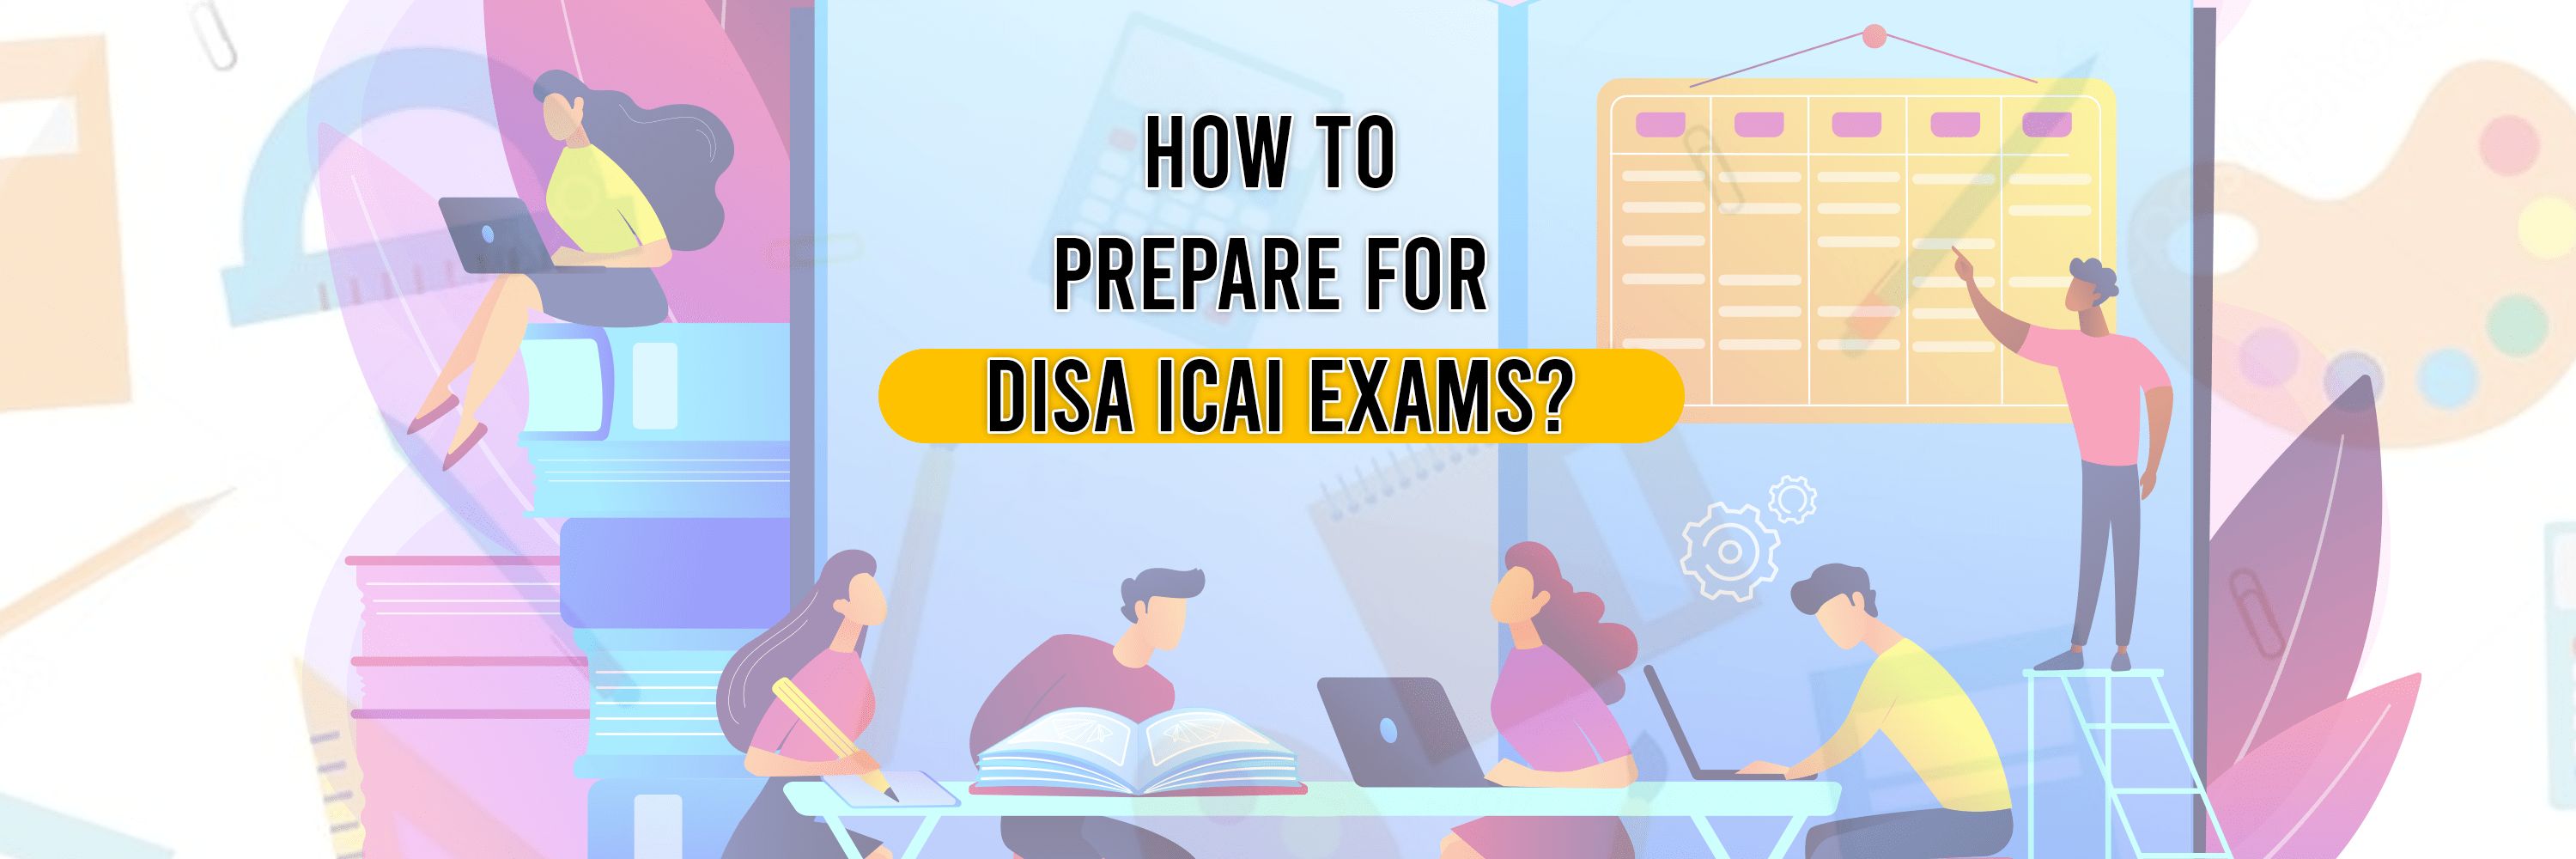 How to prepare for DISA ICAI exams?